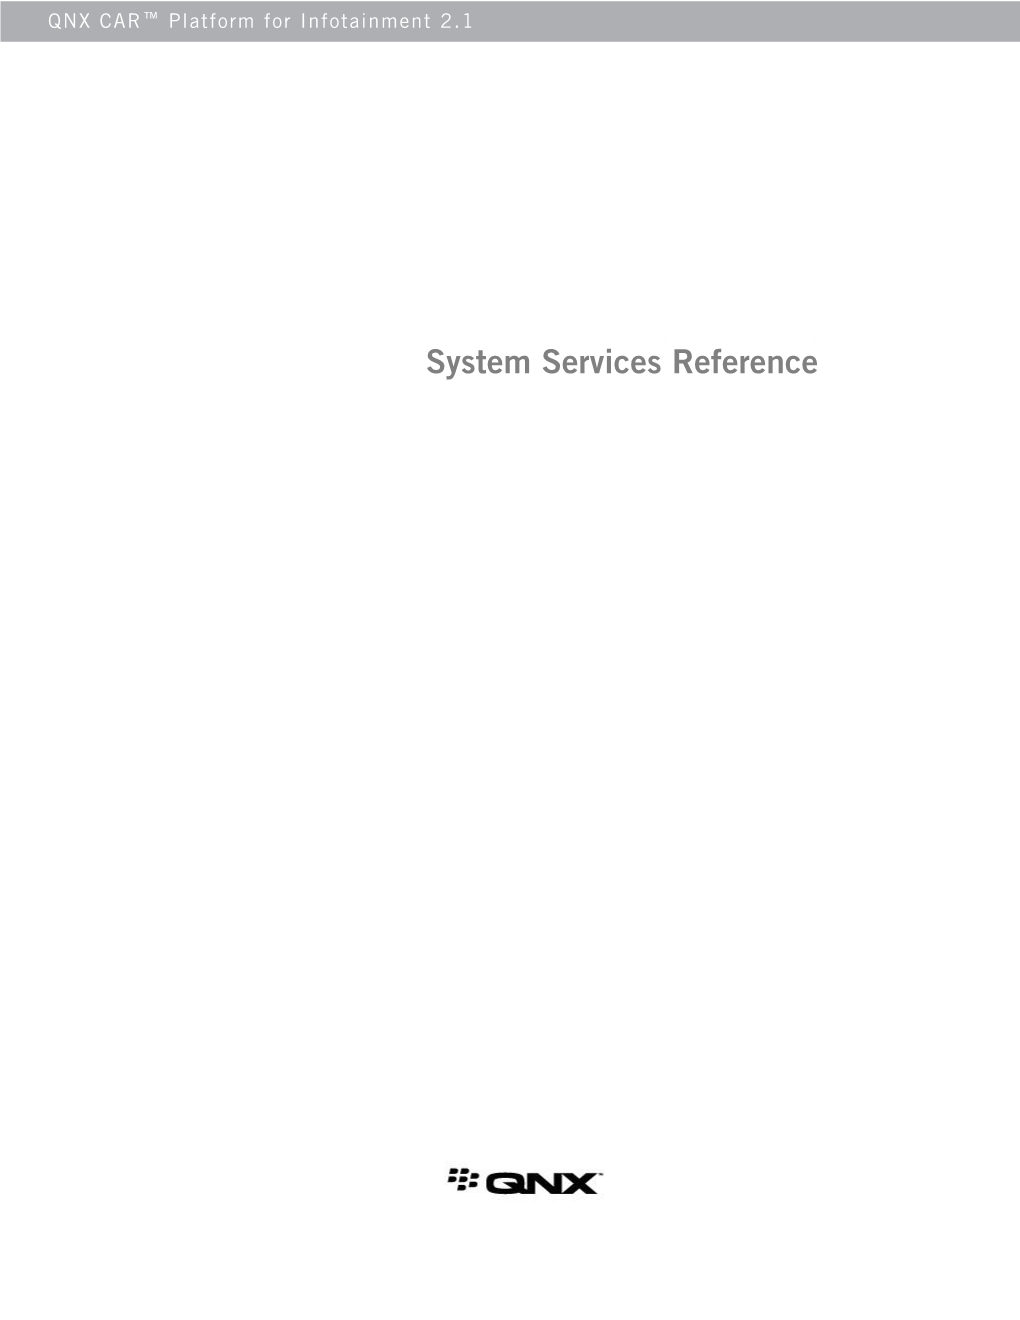 System Services Reference